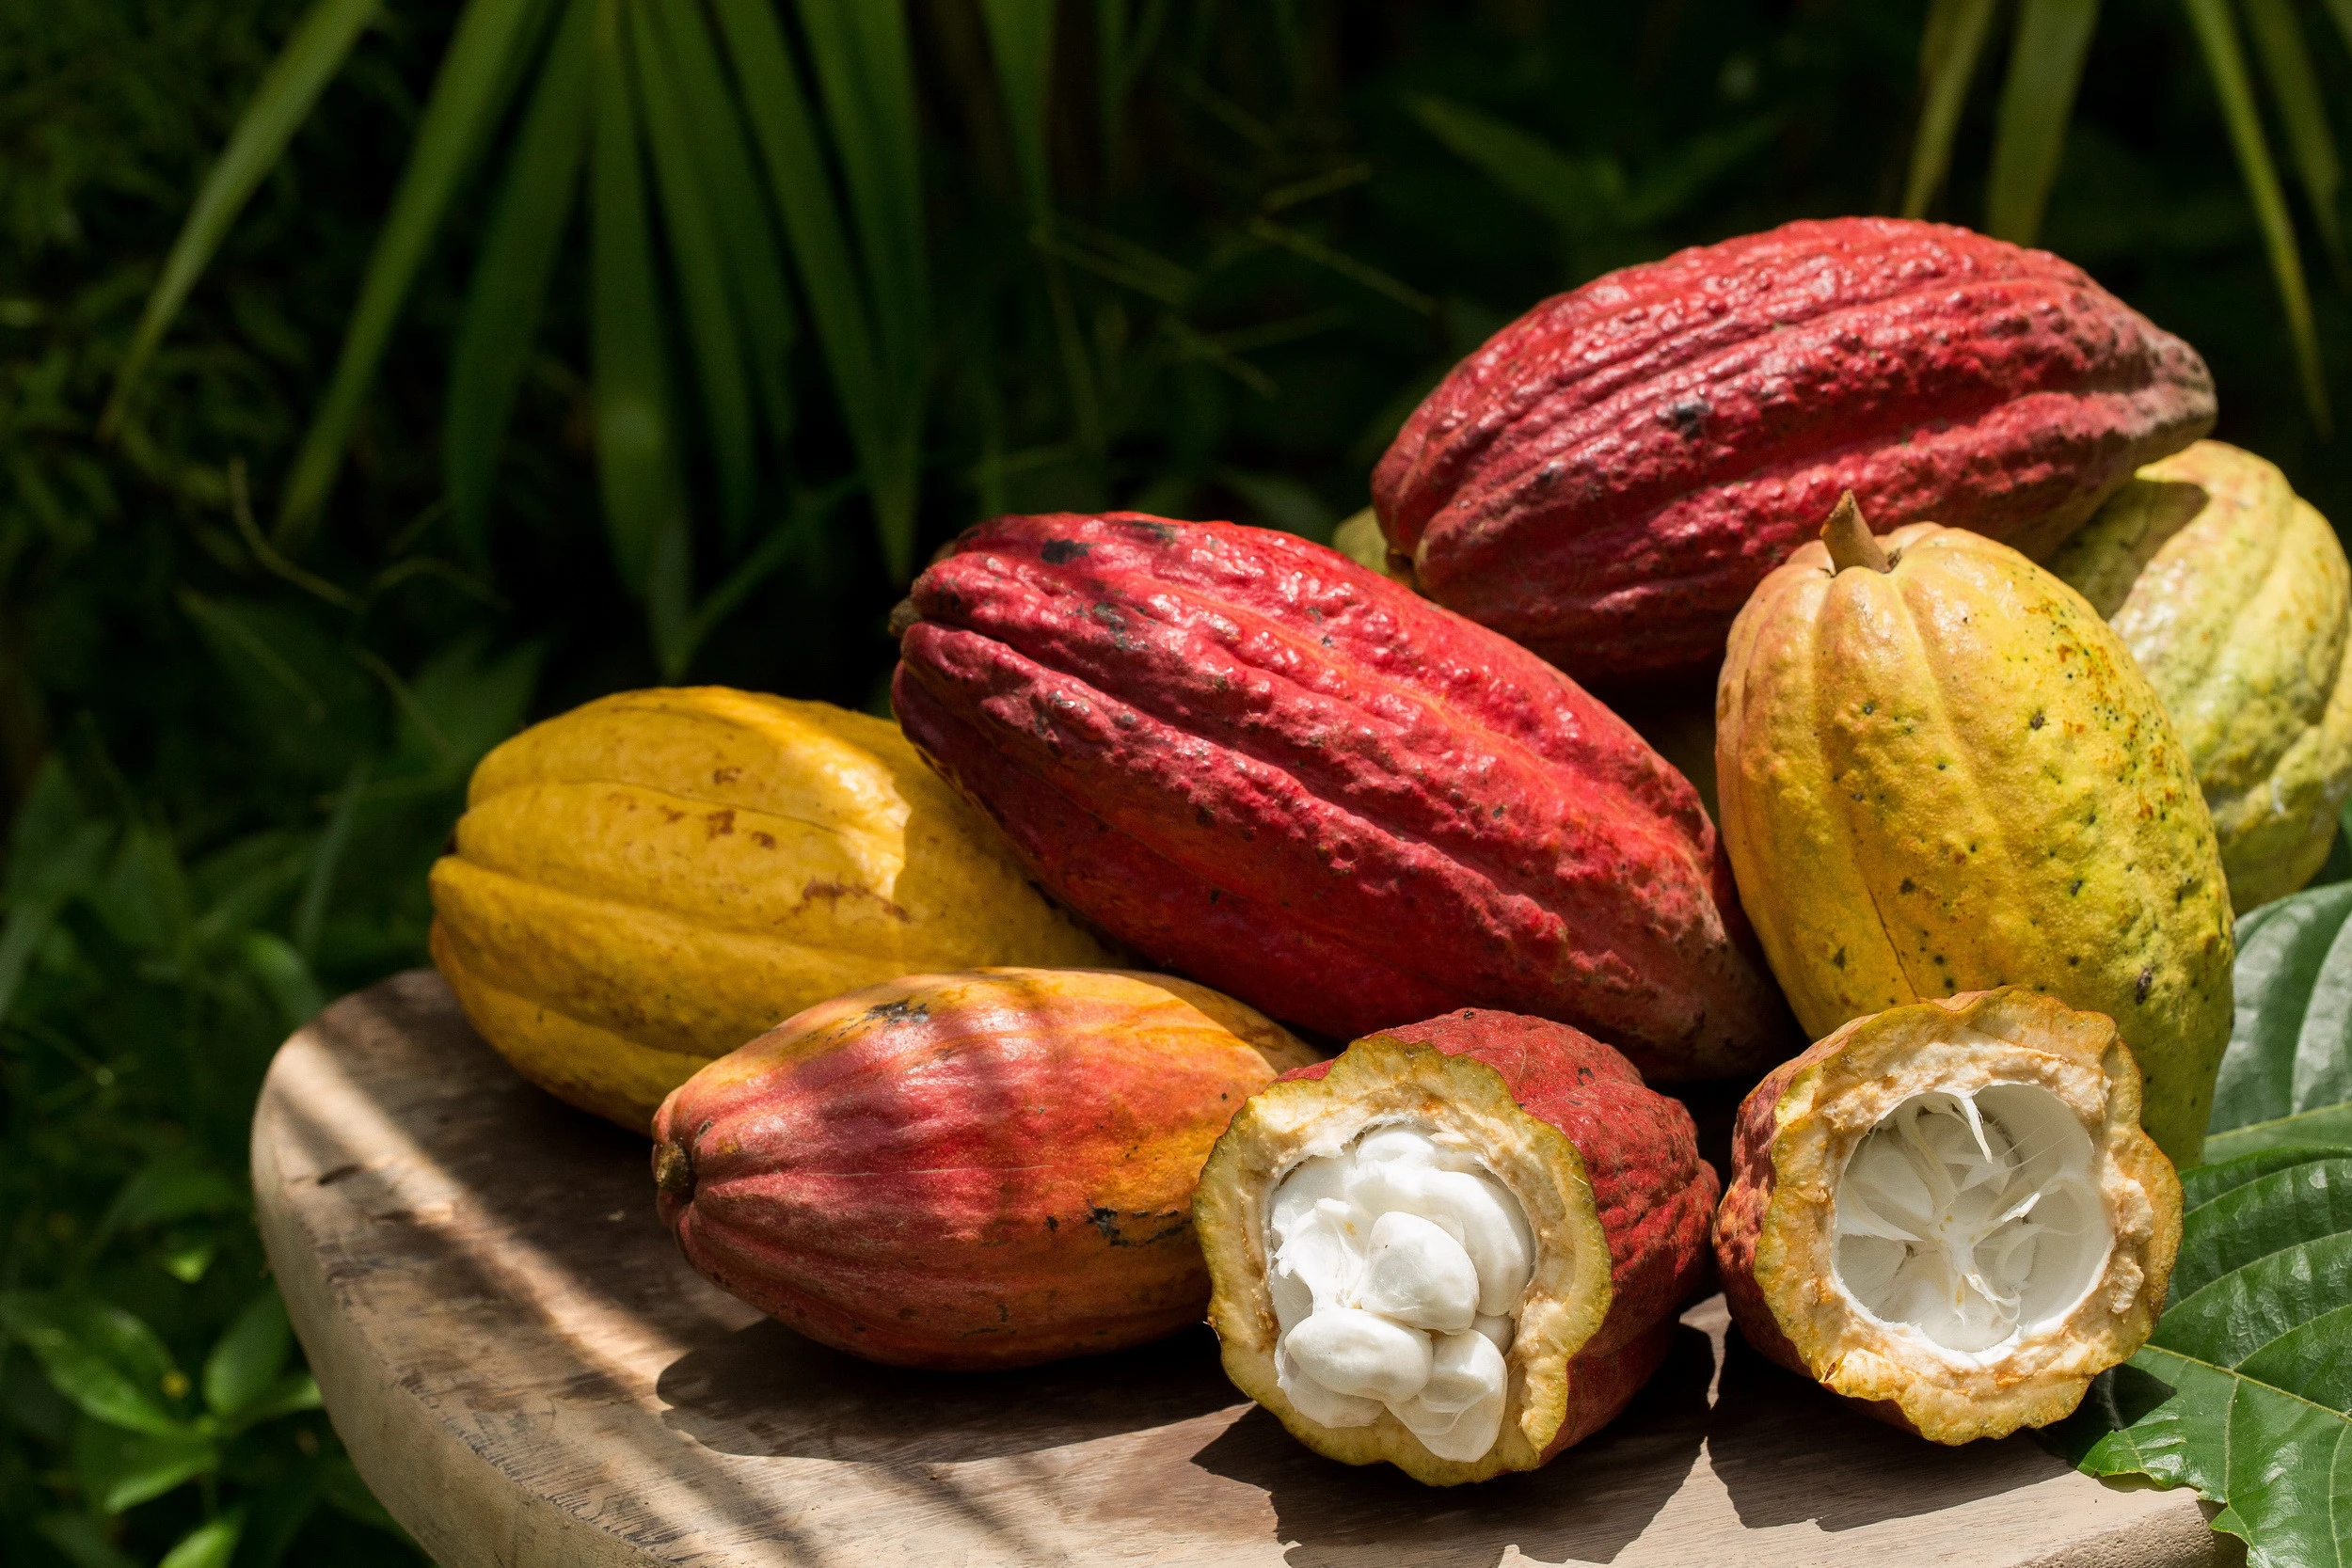 Cacao Gourmet Cocoa Beans From Vietnam - CacaoTrace Program